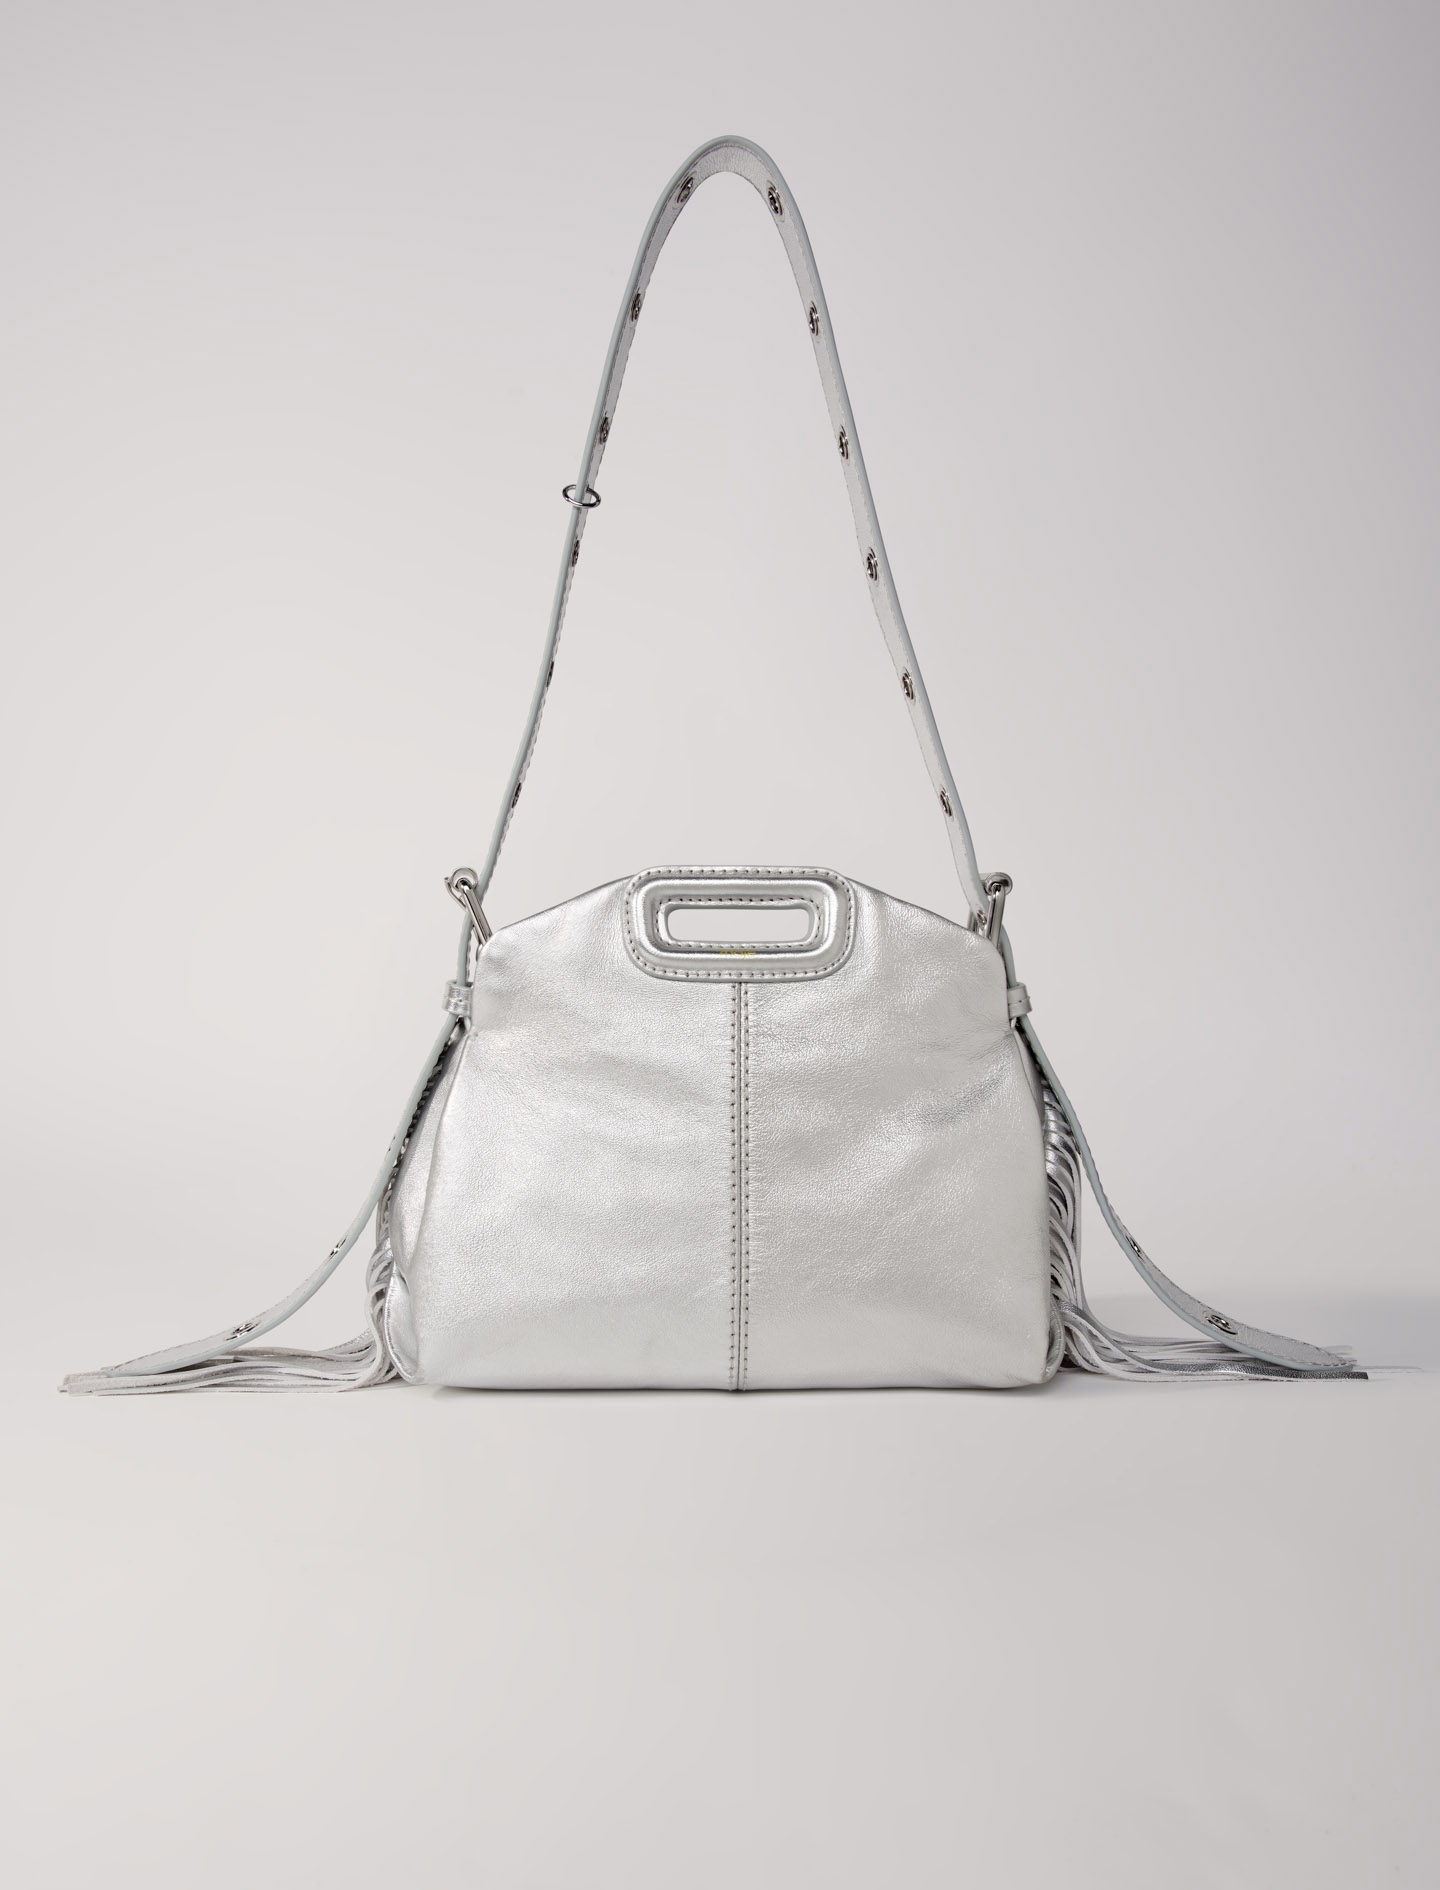 Maje Woman's cotton Leather: Metallic leather mini Miss M bag for Fall/Winter, in color Silver / Grey